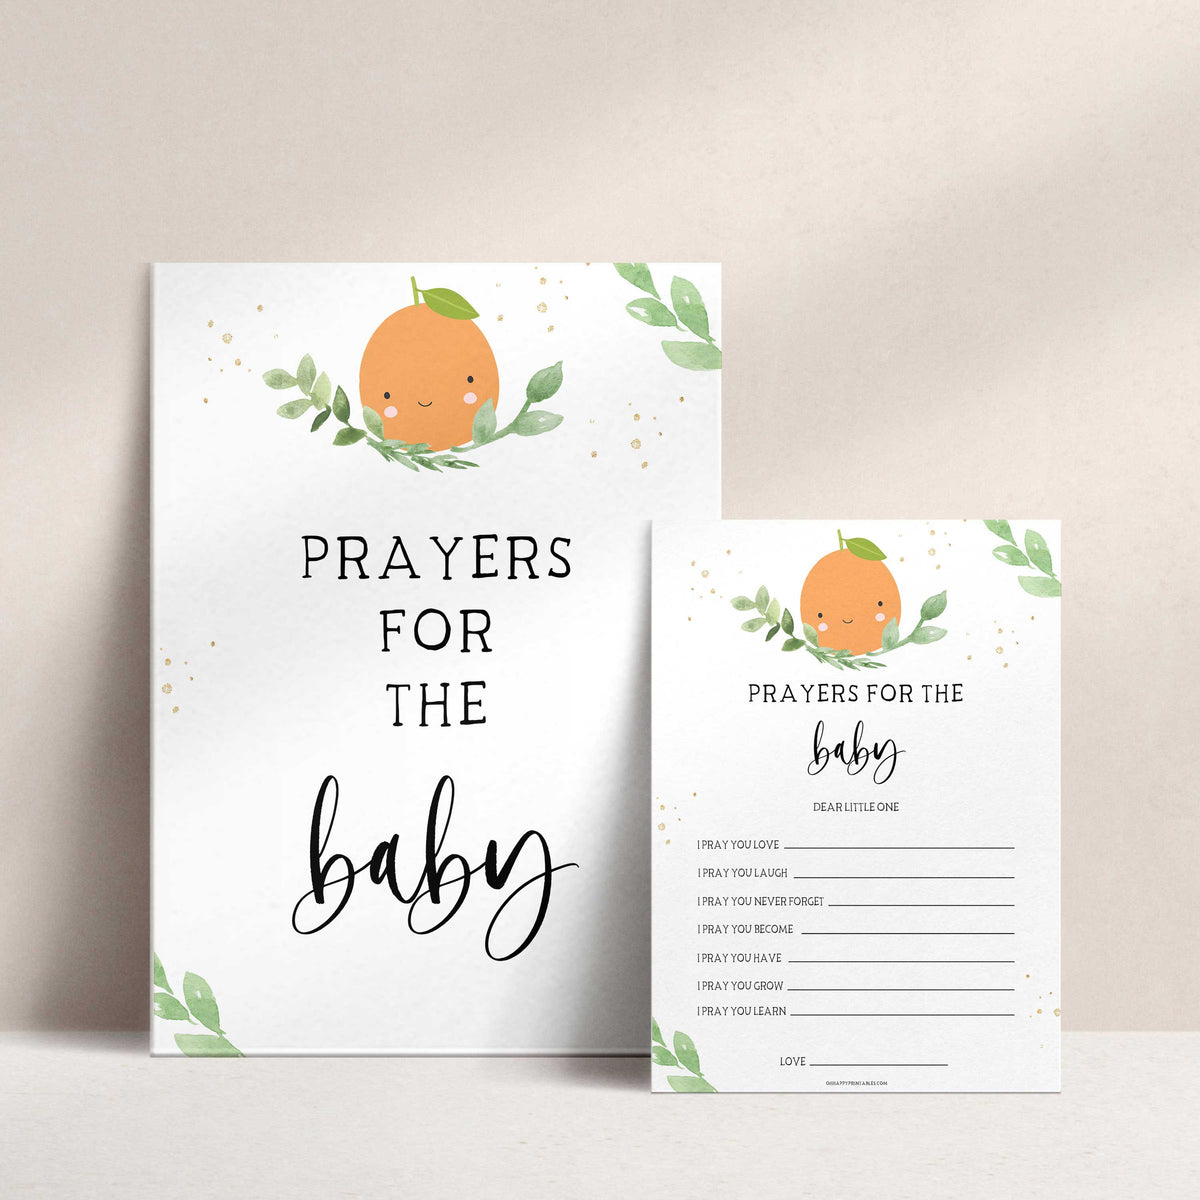 prayers for the baby game, Printable baby shower games, little cutie baby games, baby shower games, fun baby shower ideas, top baby shower ideas, little cutie baby shower, baby shower games, fun little cutie baby shower ideas